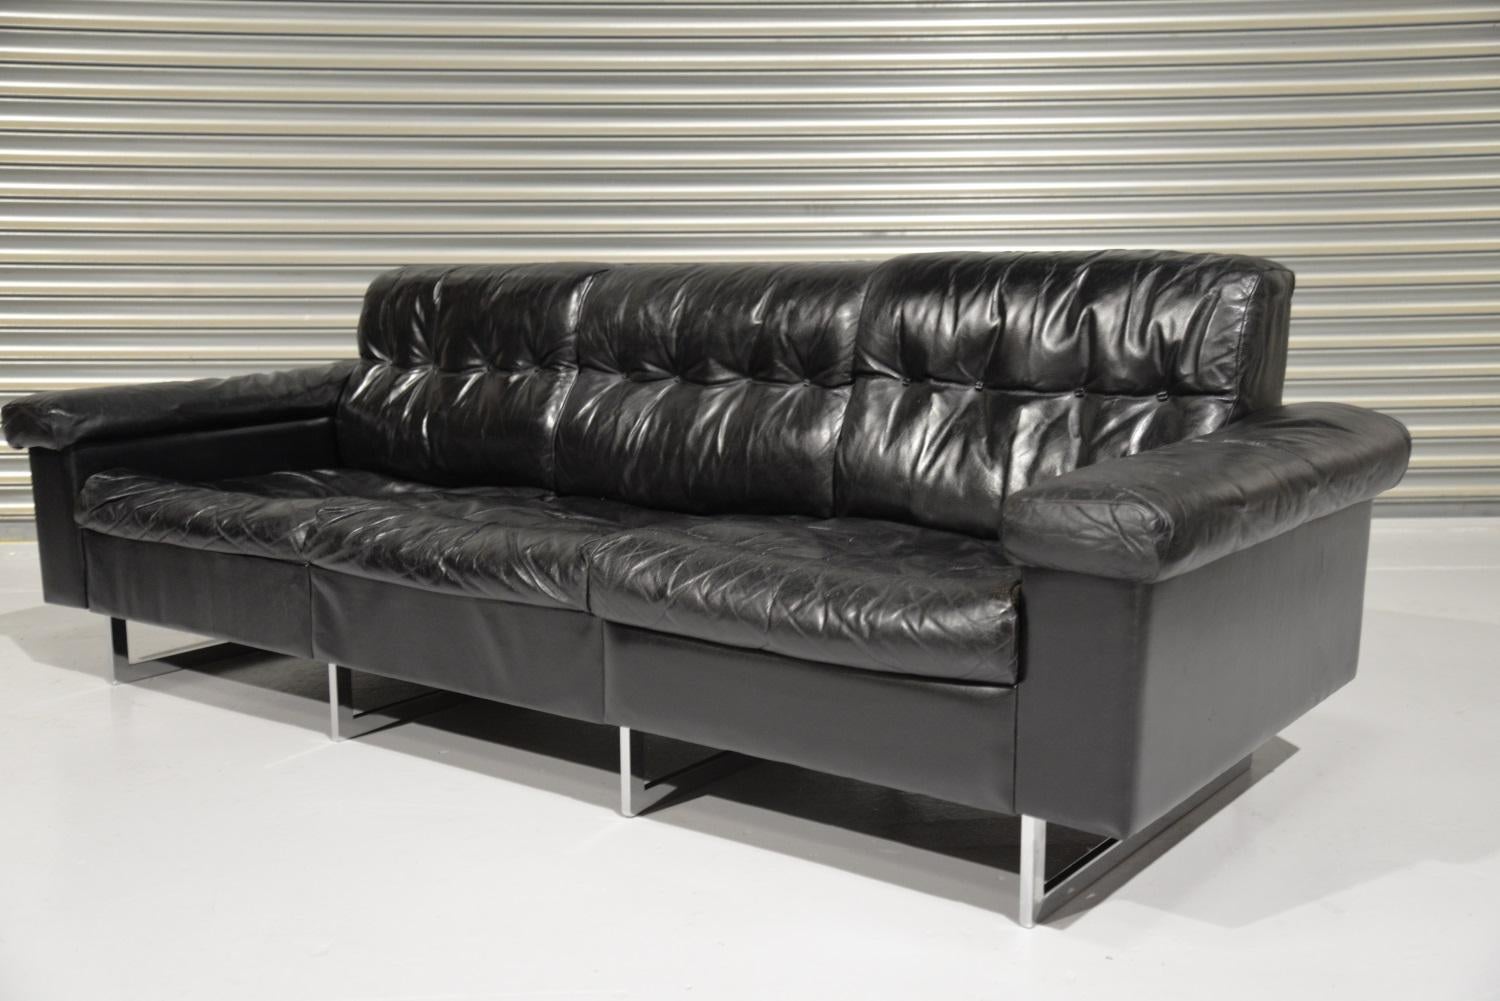 A vintage de Sede three-seat sofa in stunning black leather. Hand built in he 1970s by de Sede craftsman in Switzerland, this original sofa stands on polished chrome-plated legs. This stylish sofa is over 40 years old, as expected clearly shows